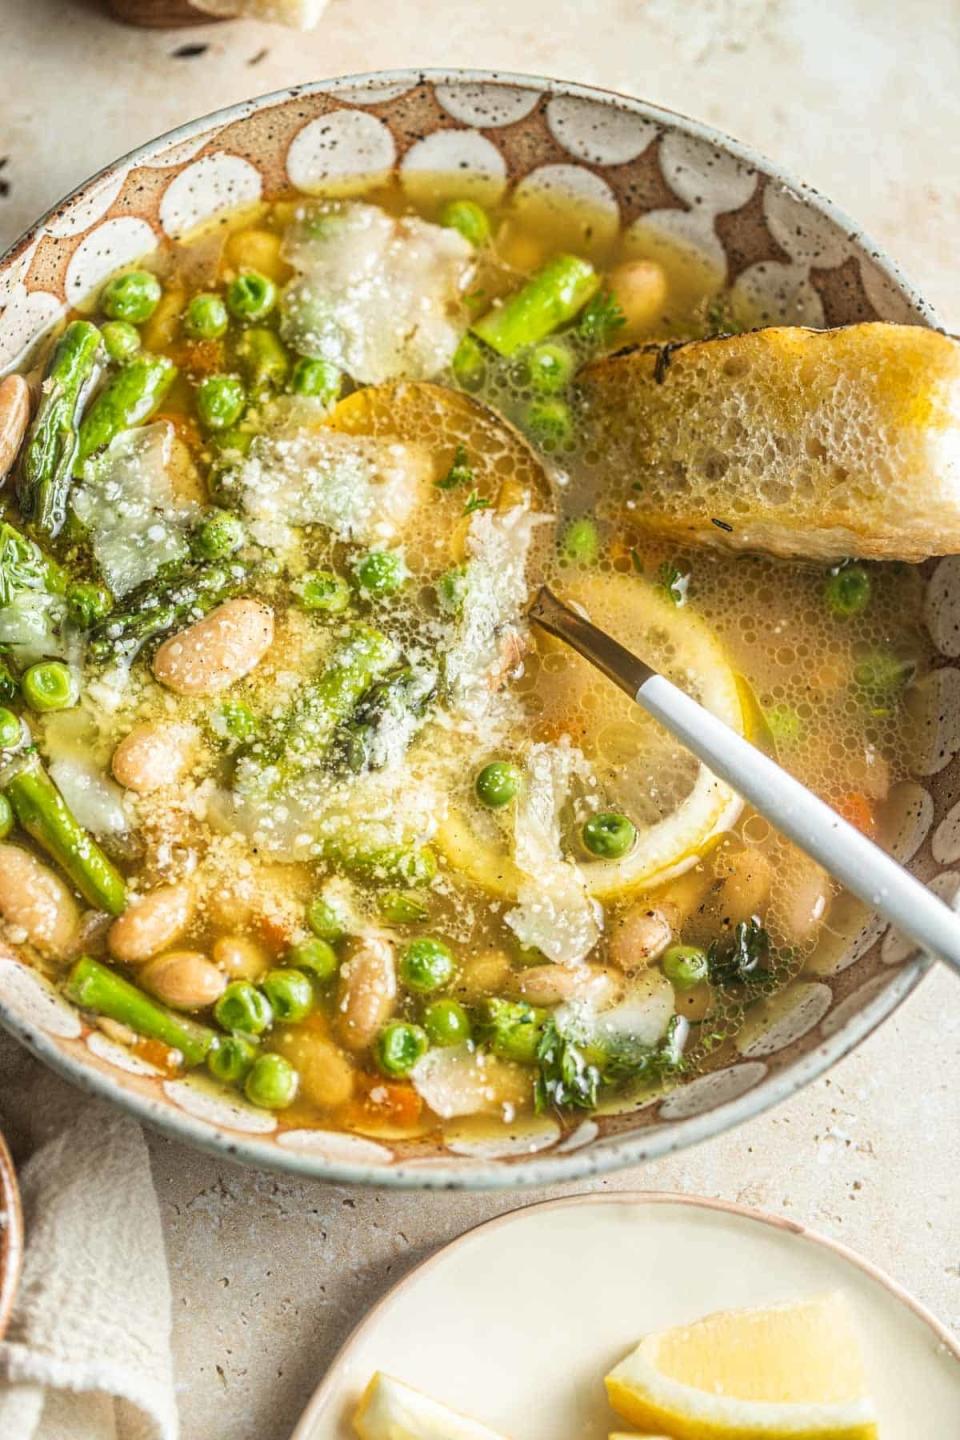 Bowl of soup with beans, peas, asparagus, lemon slices, and topped with grated cheese